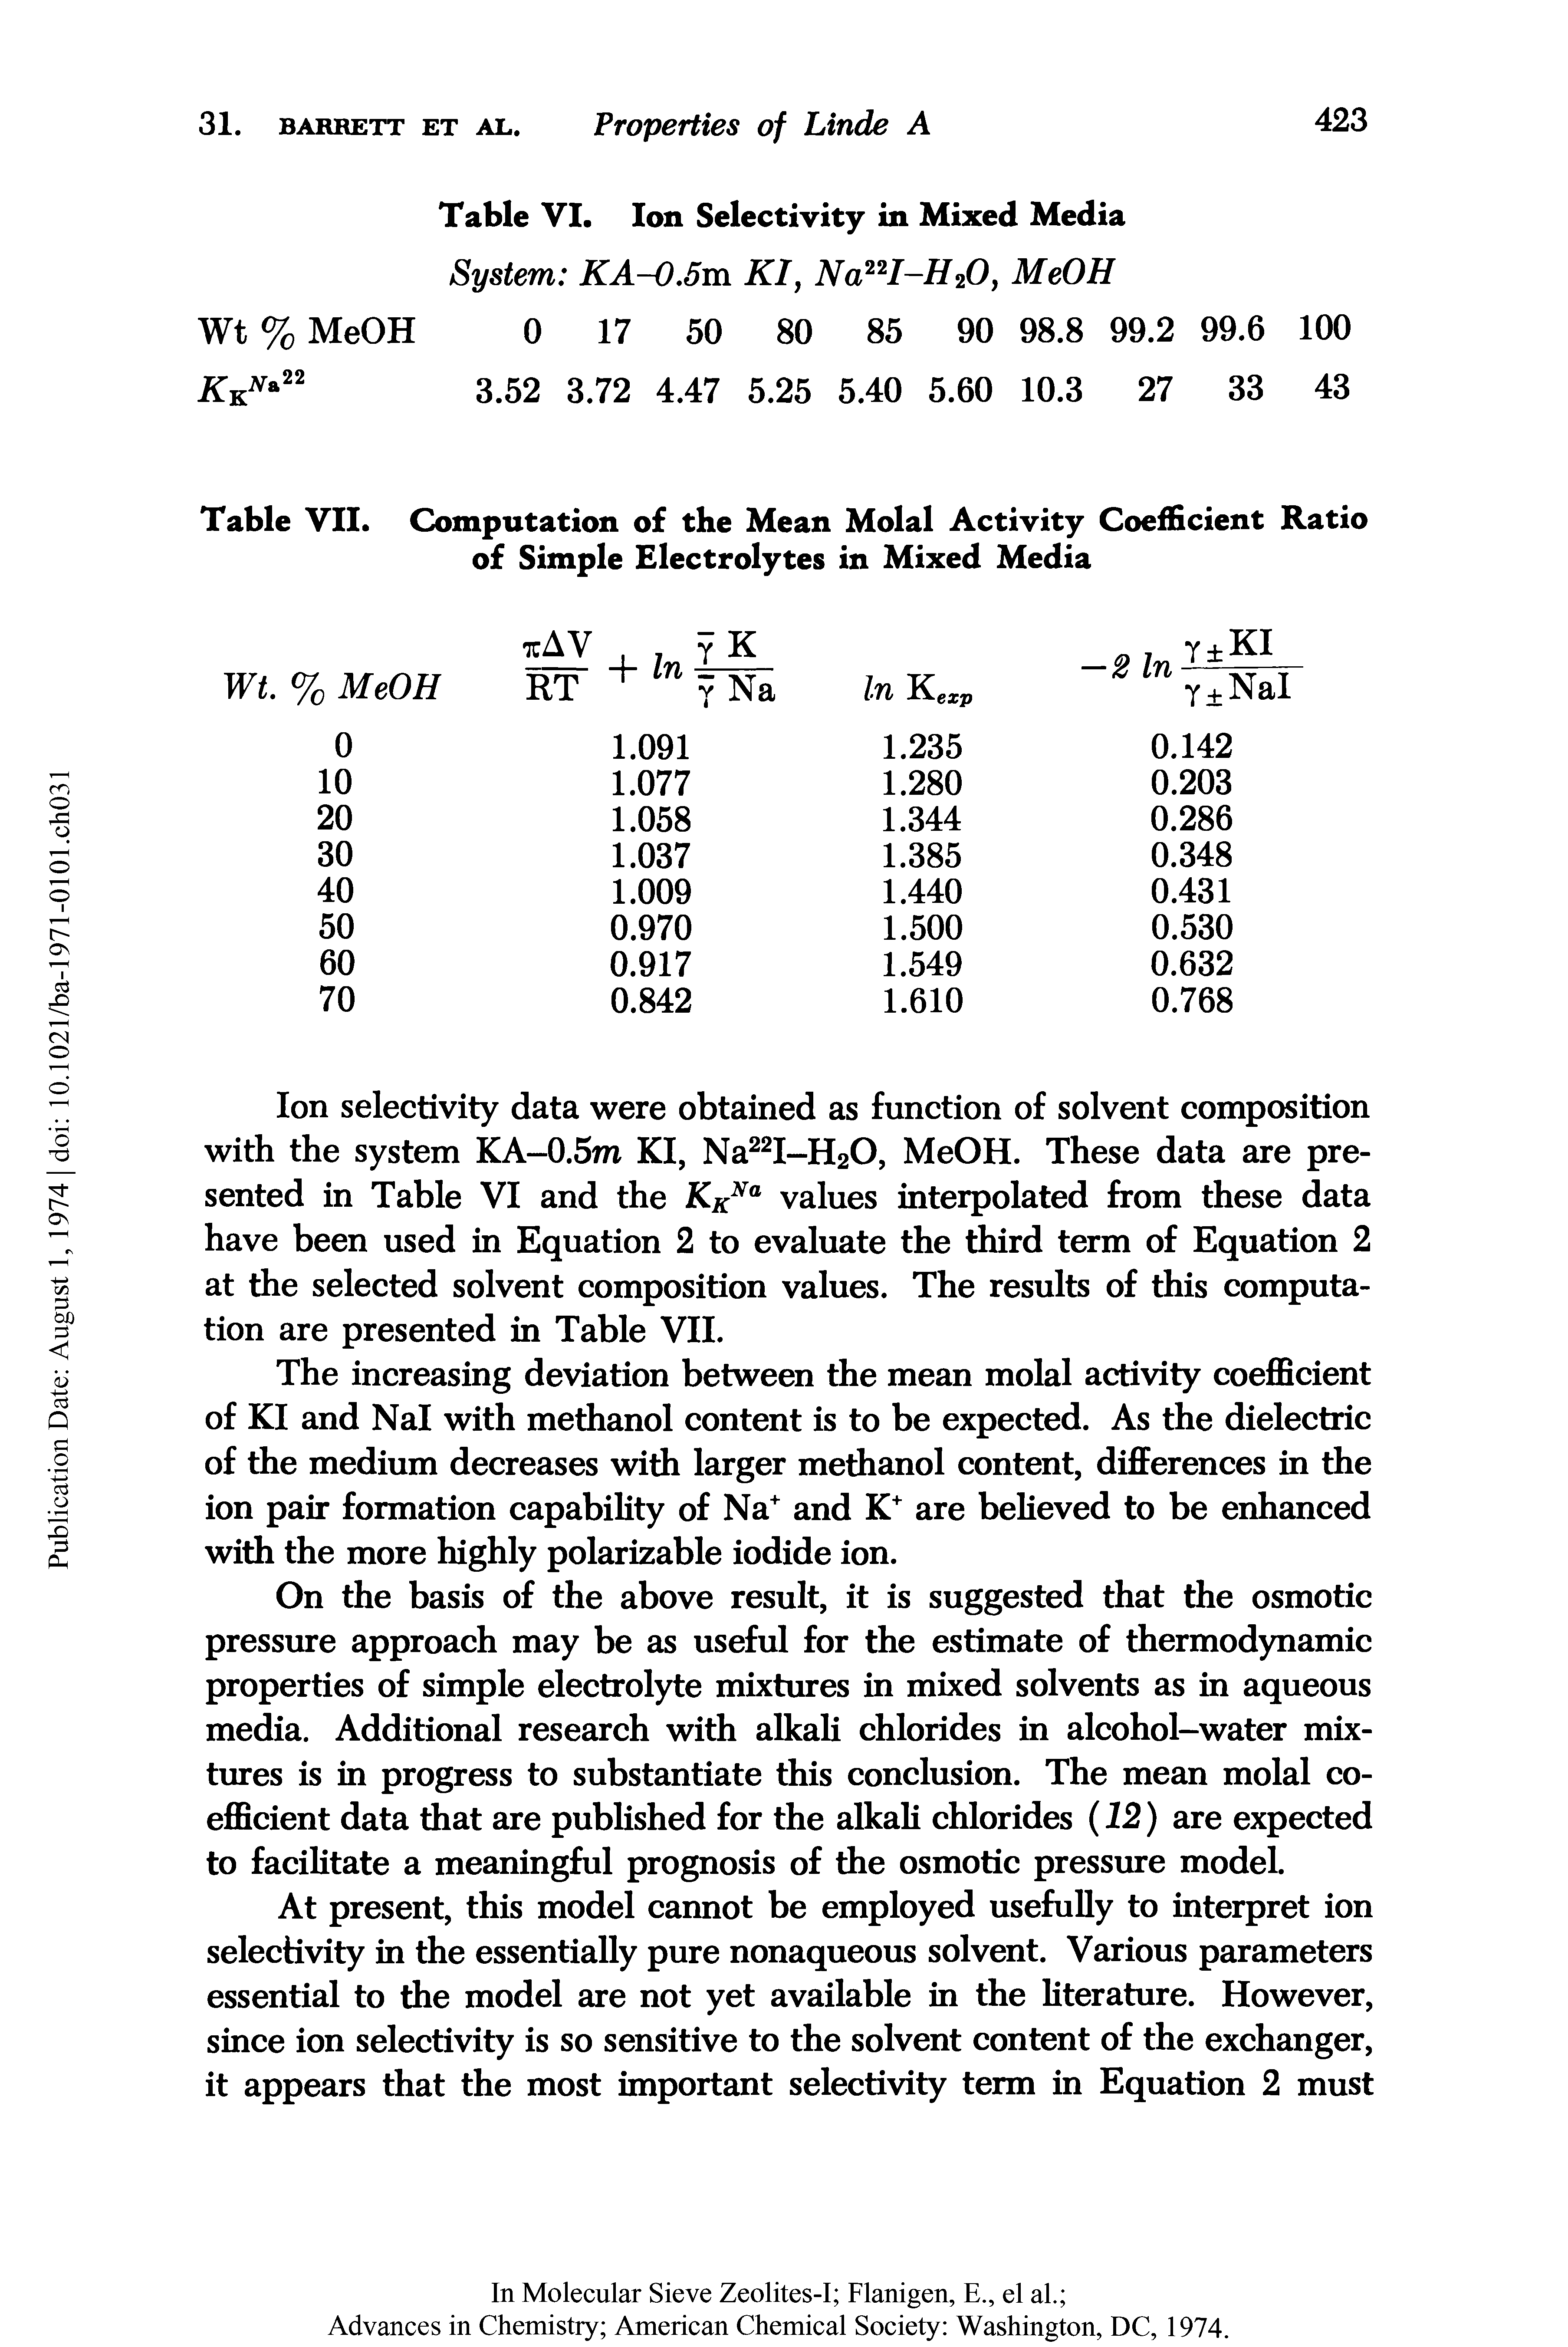 Table VII. Computation of the Mean Molal Activity Coefficient Ratio of Simple Electrolytes in Mixed Media...